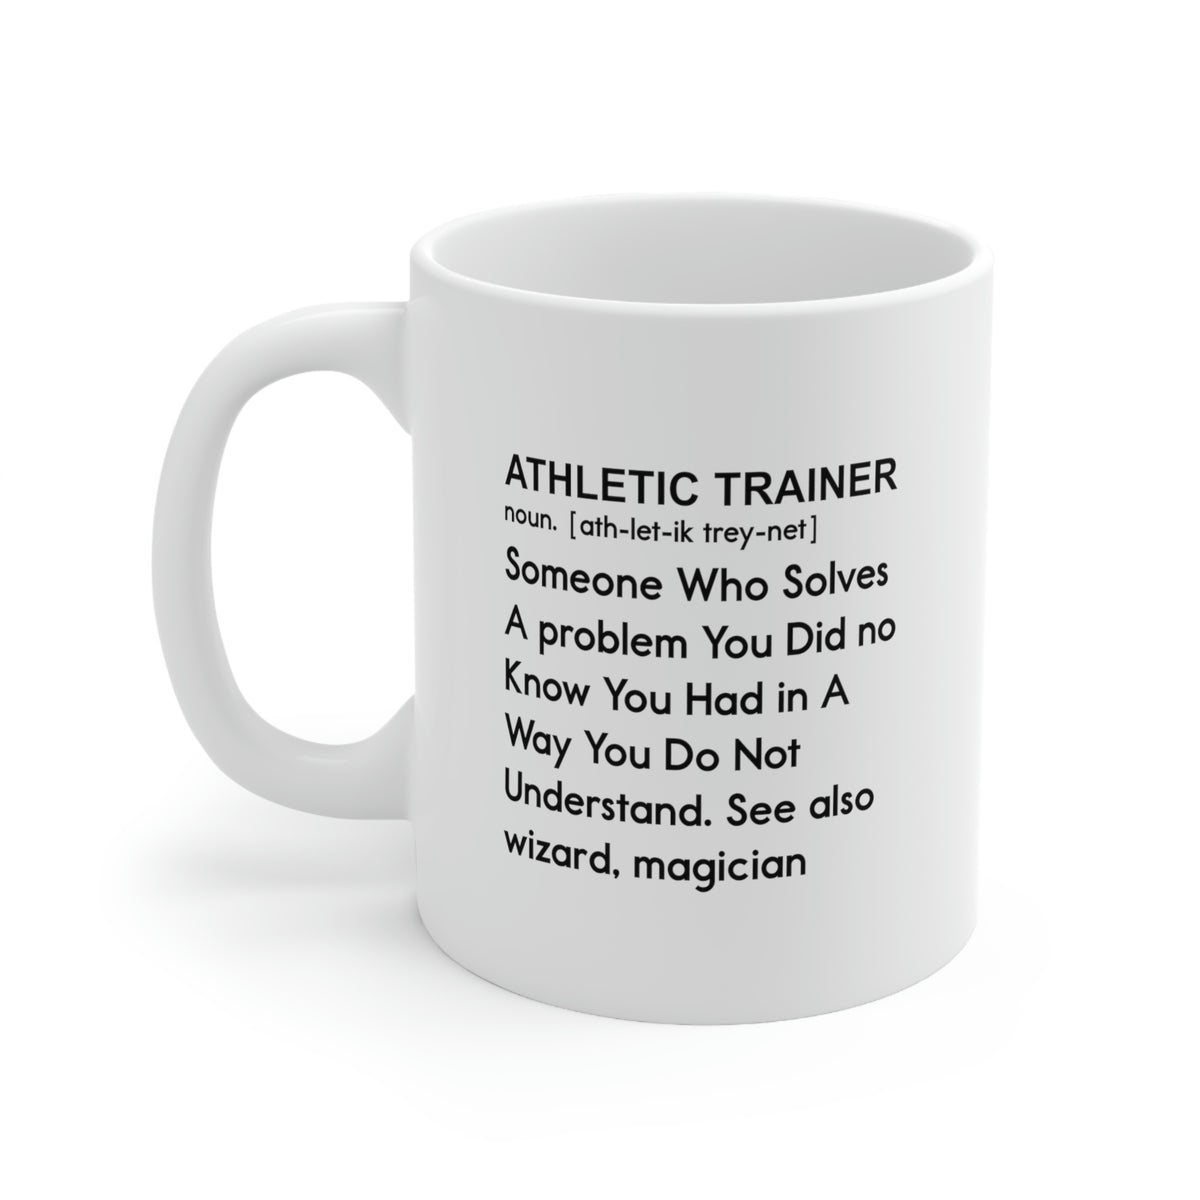 Funny Athletic Trainer Coffee Mug - ATHLETIC TRAINER Meaning - Sport Training Gifts For Men Women